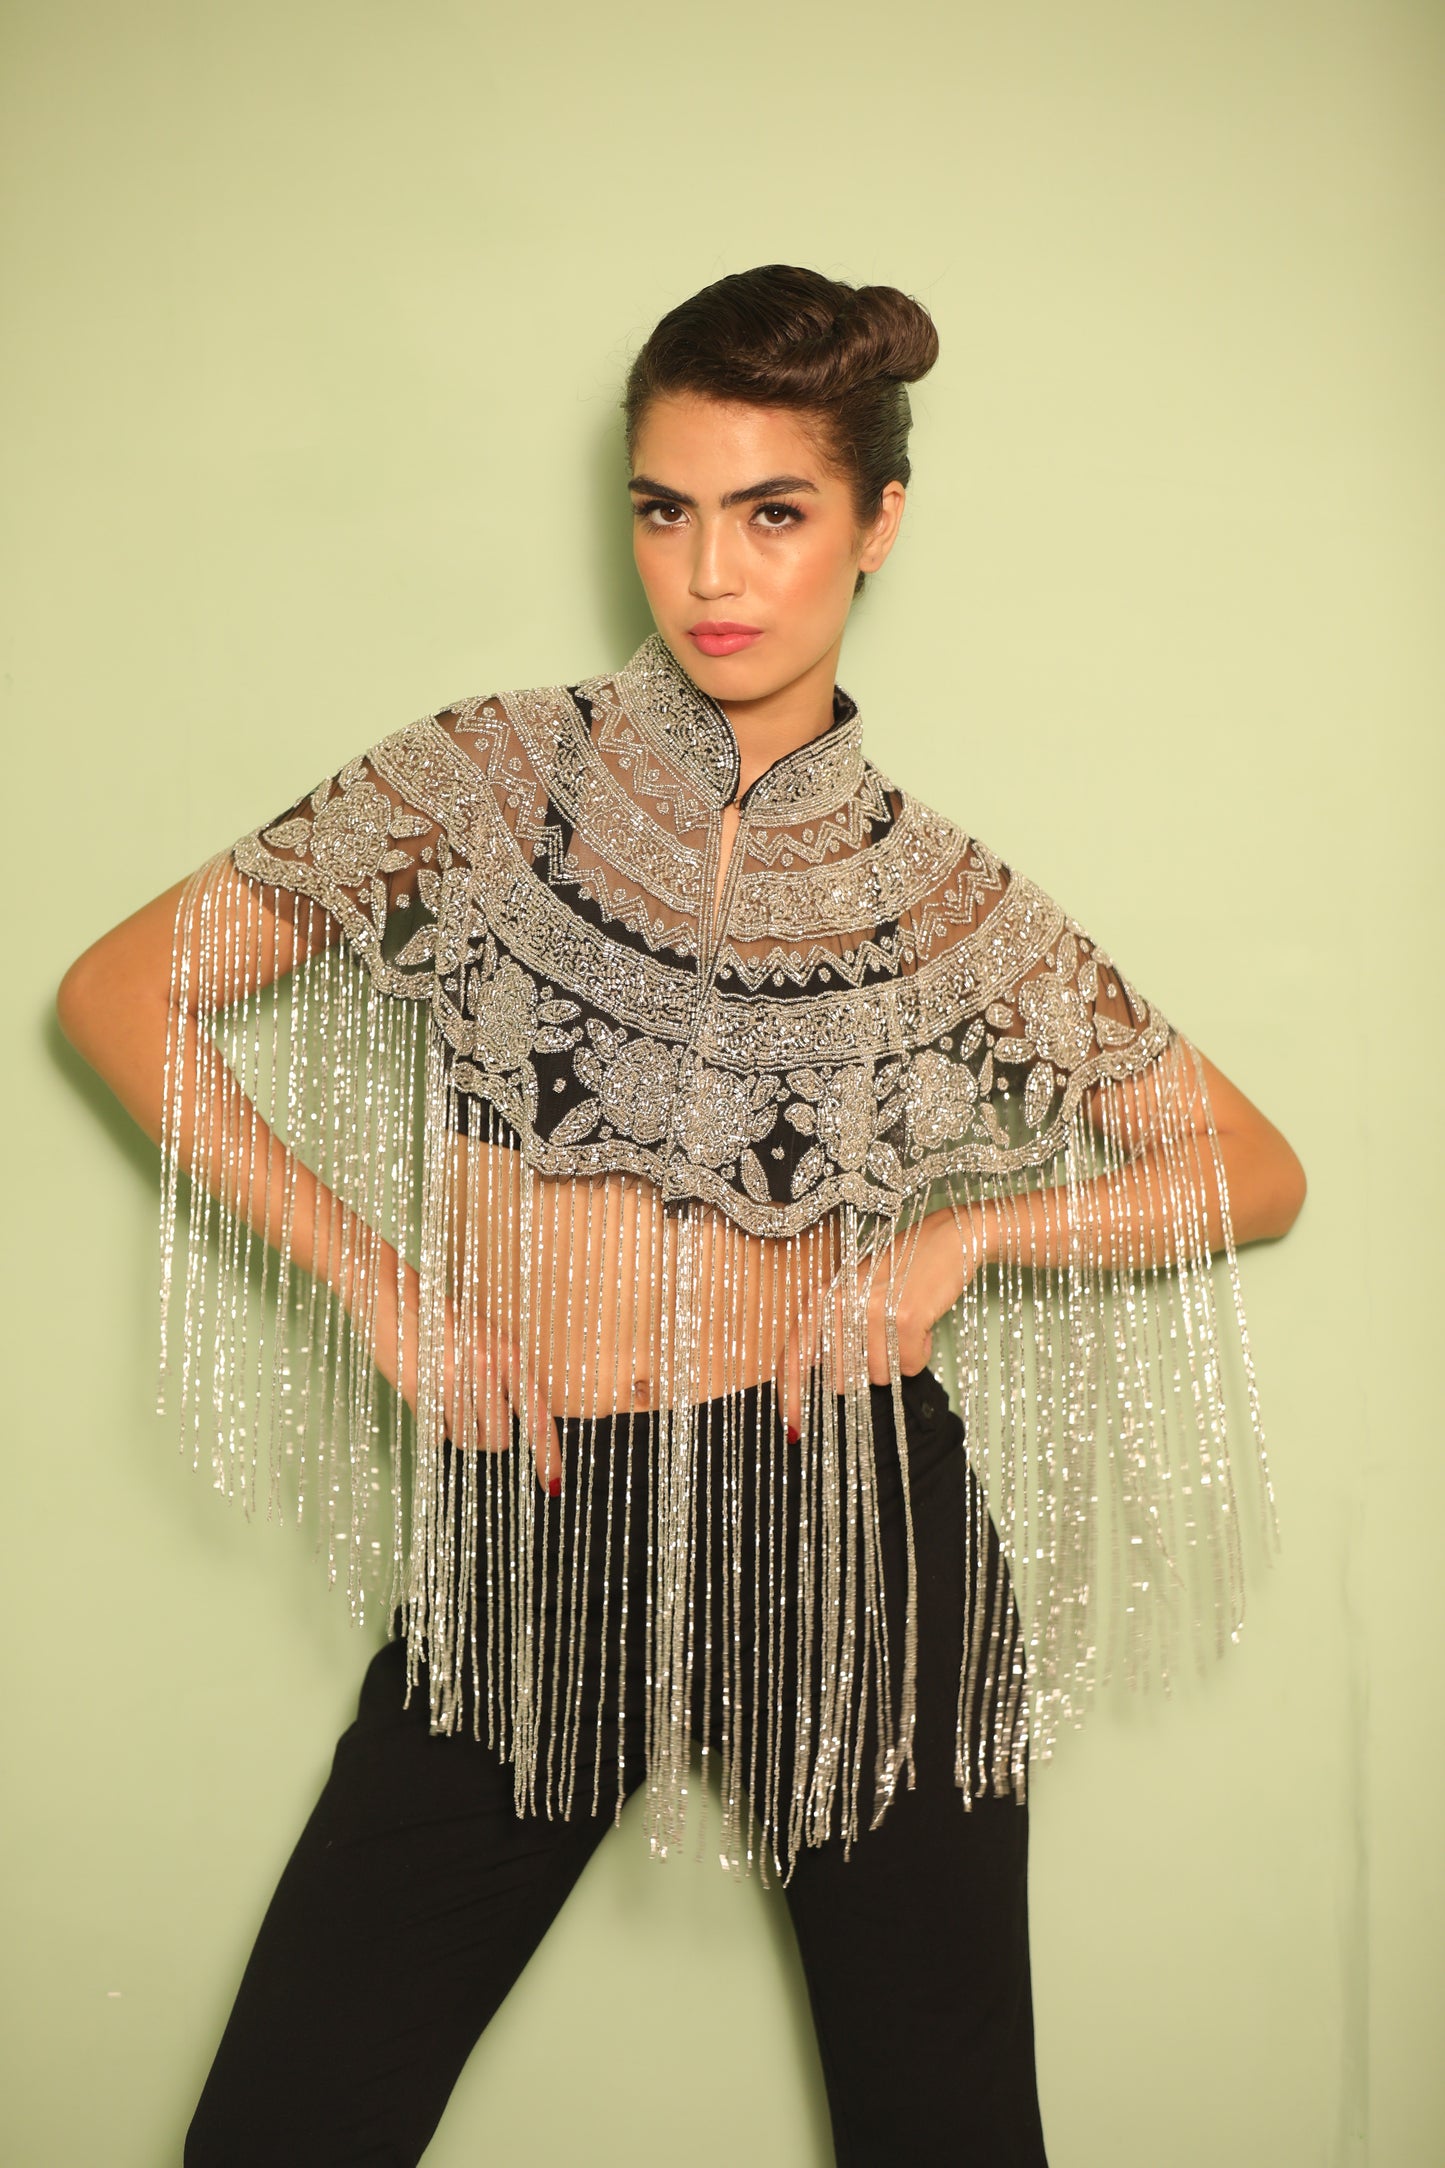 Fashionable Cape for Sarees and Gowns: Elevate your style with this elegant accessory." "Elegant Beaded Cape with Tassels: Perfect for adding sophistication to any outfit